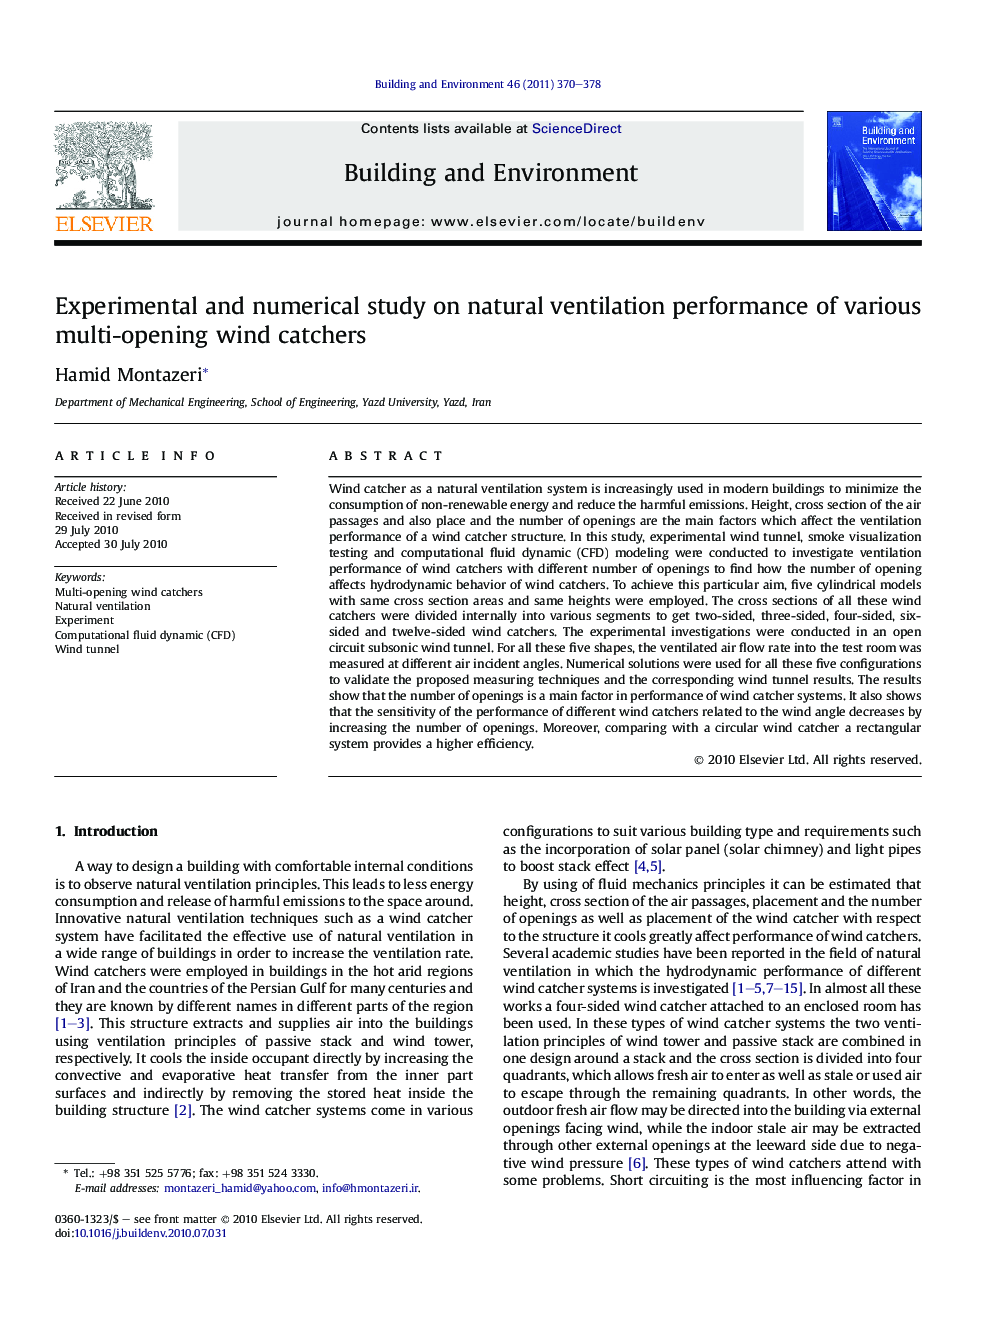 Experimental and numerical study on natural ventilation performance of various multi-opening wind catchers